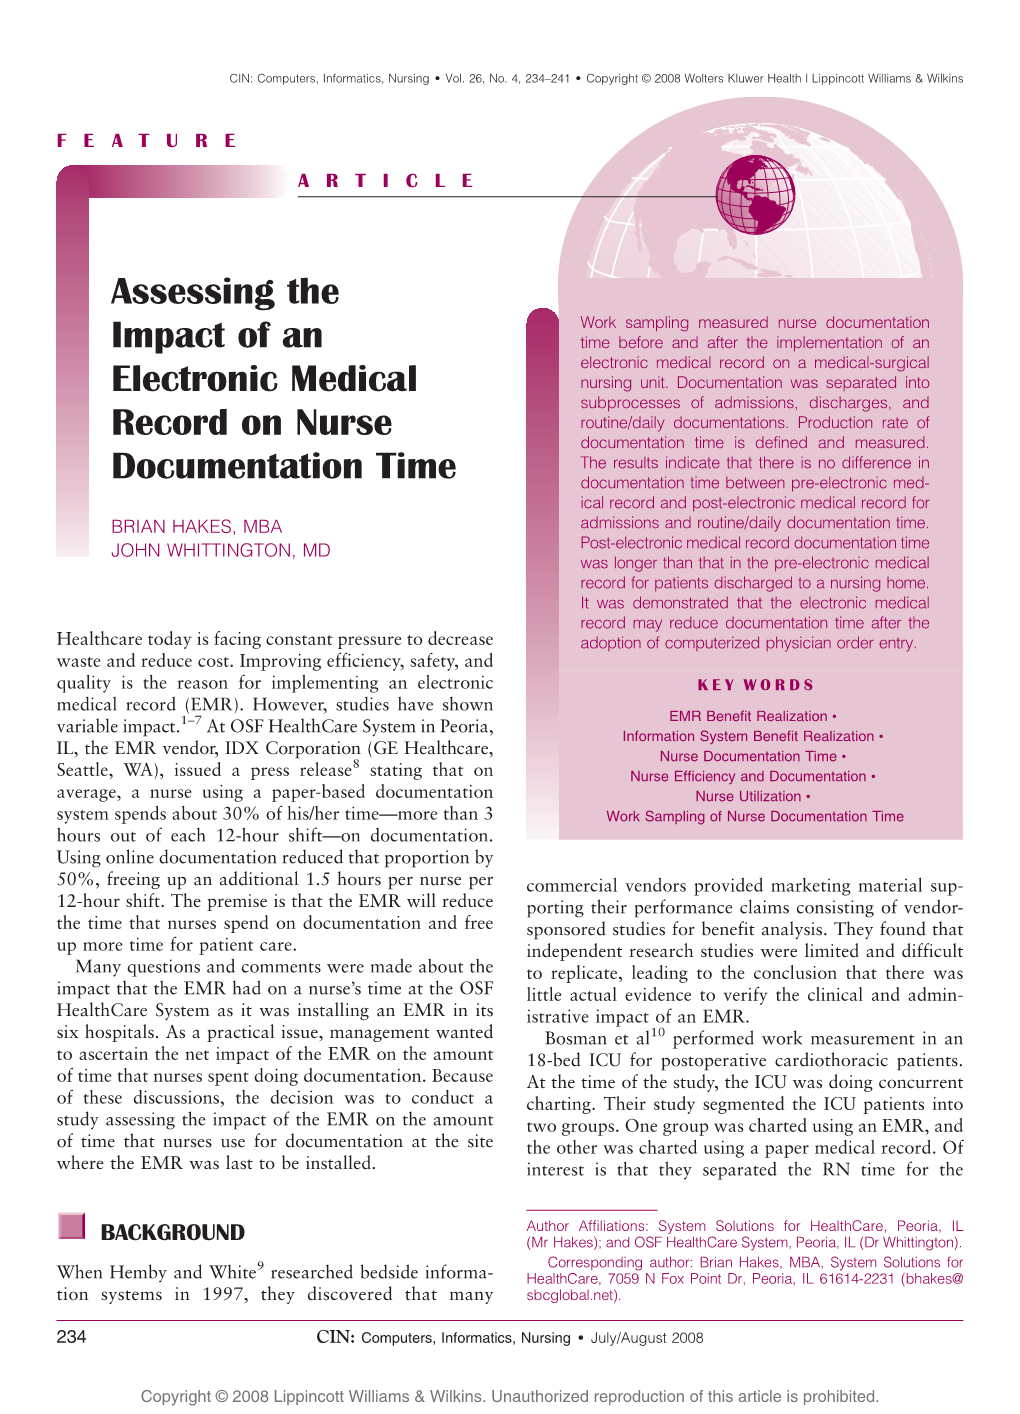 Assessing the Impact of an Electronic Medical Record on Nurse